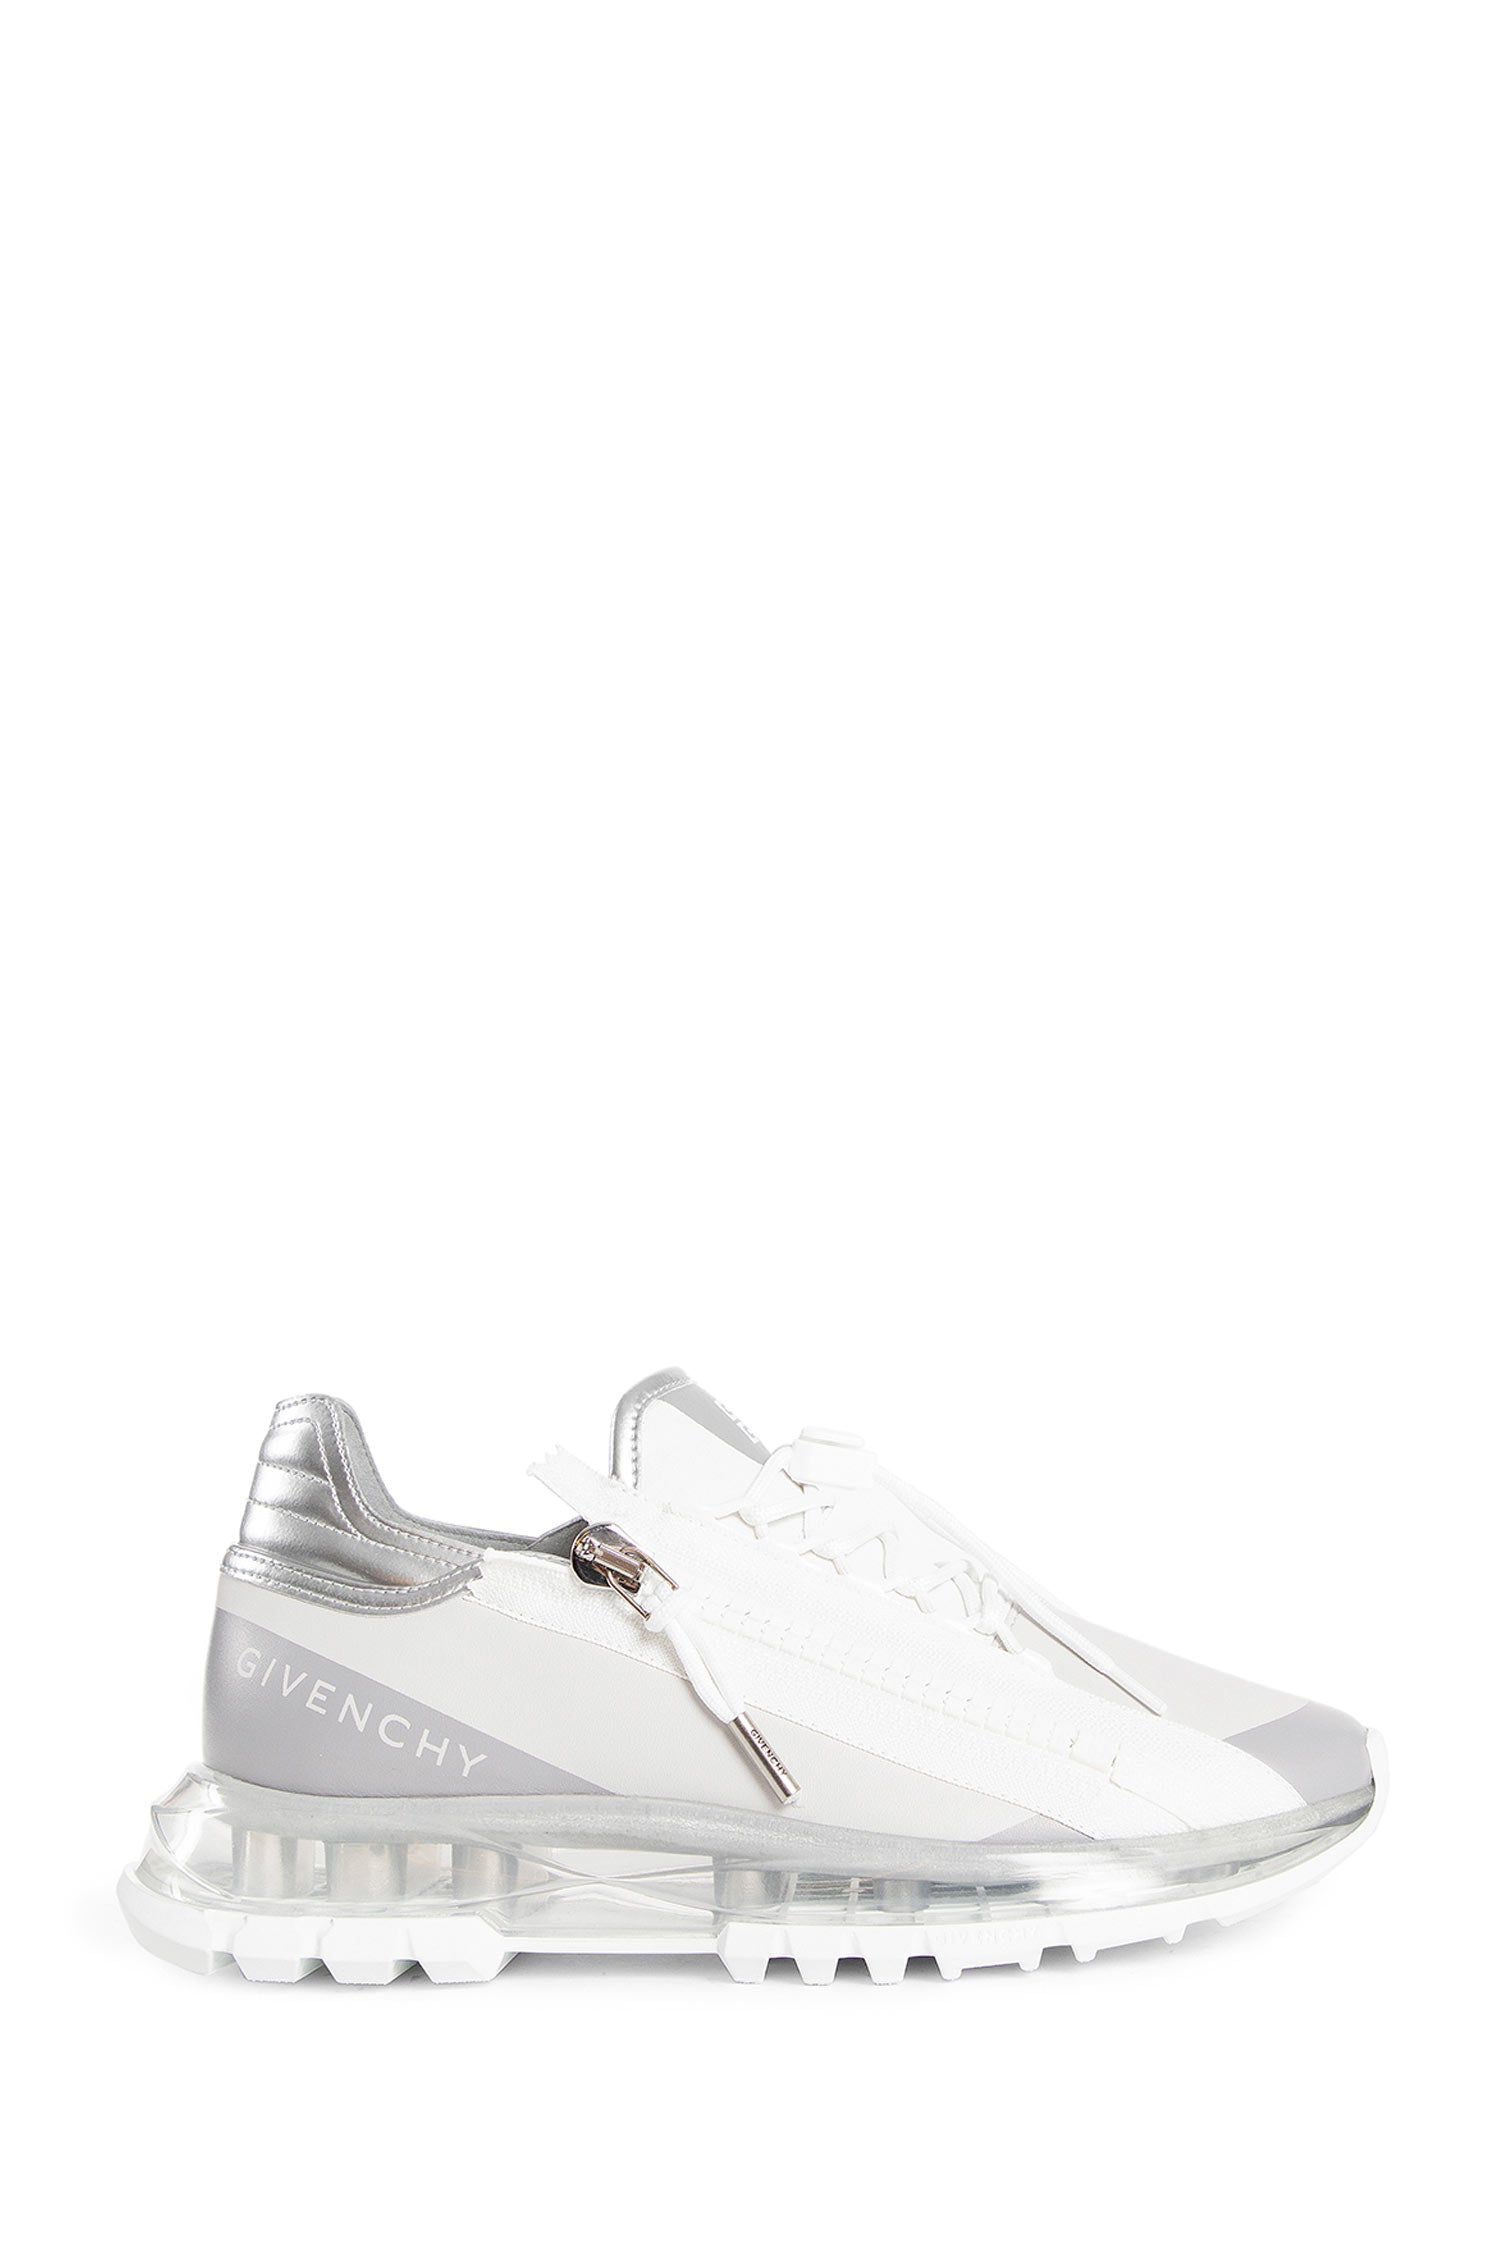 GIVENCHY WOMAN SILVER SNEAKERS